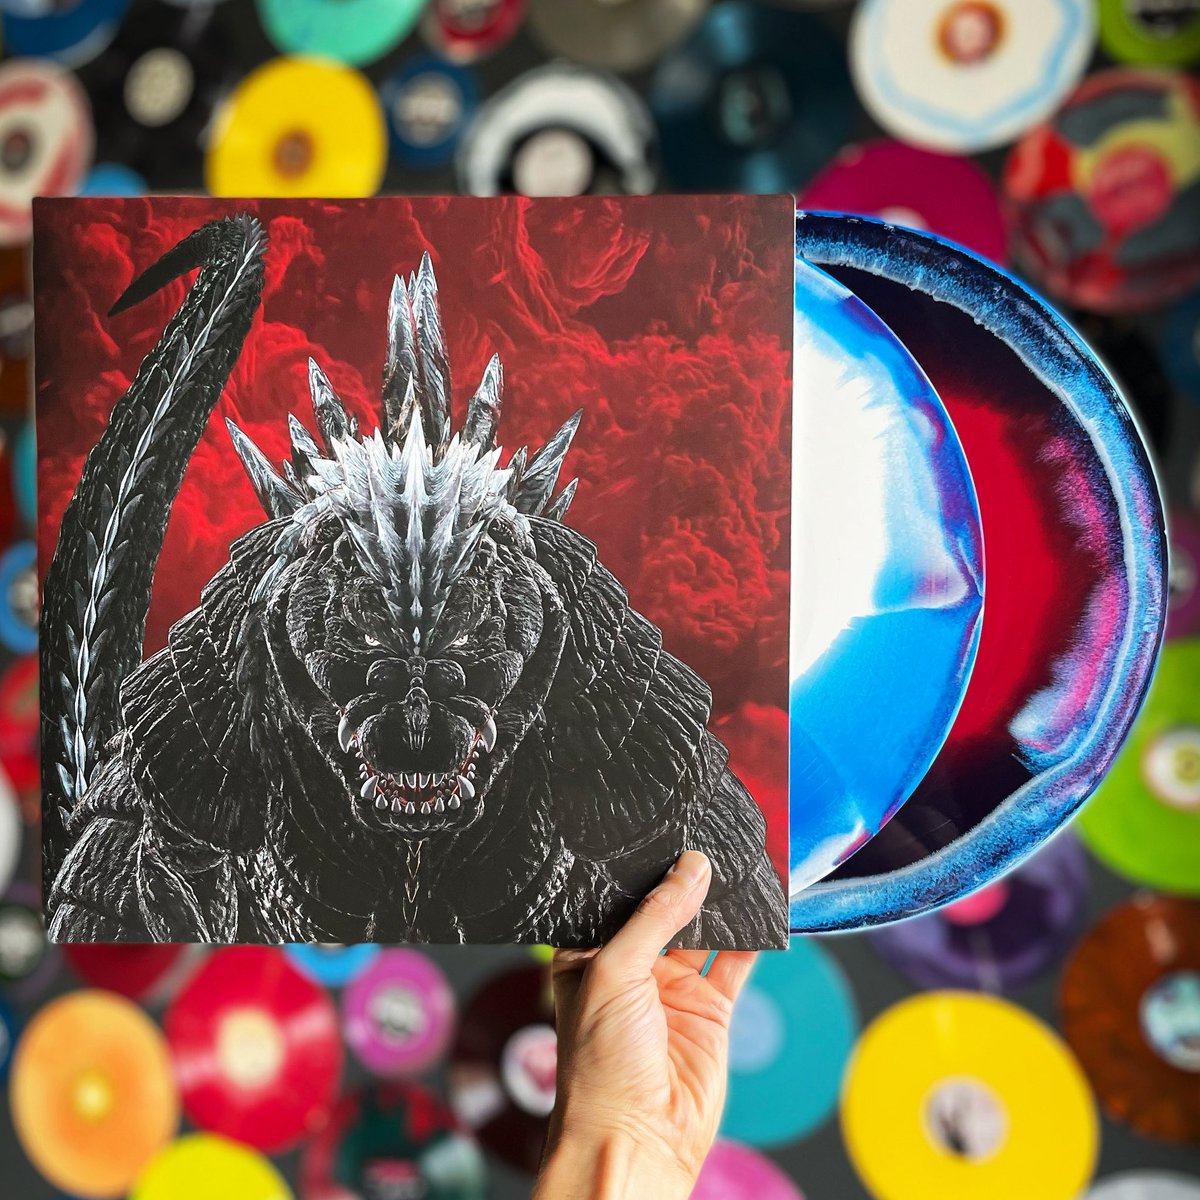 To celebrate Godzilla Day tomorrow at 9am CT, we are excited to release GODZILLA SINGULAR POINT Original Soundtrack from the Anime Series by Kan Sawada! Featuring the OST from the 13 episode animated kaiju series, 180g Jet Jaguar colored vinyl, a 12”x12” art print, and much more!